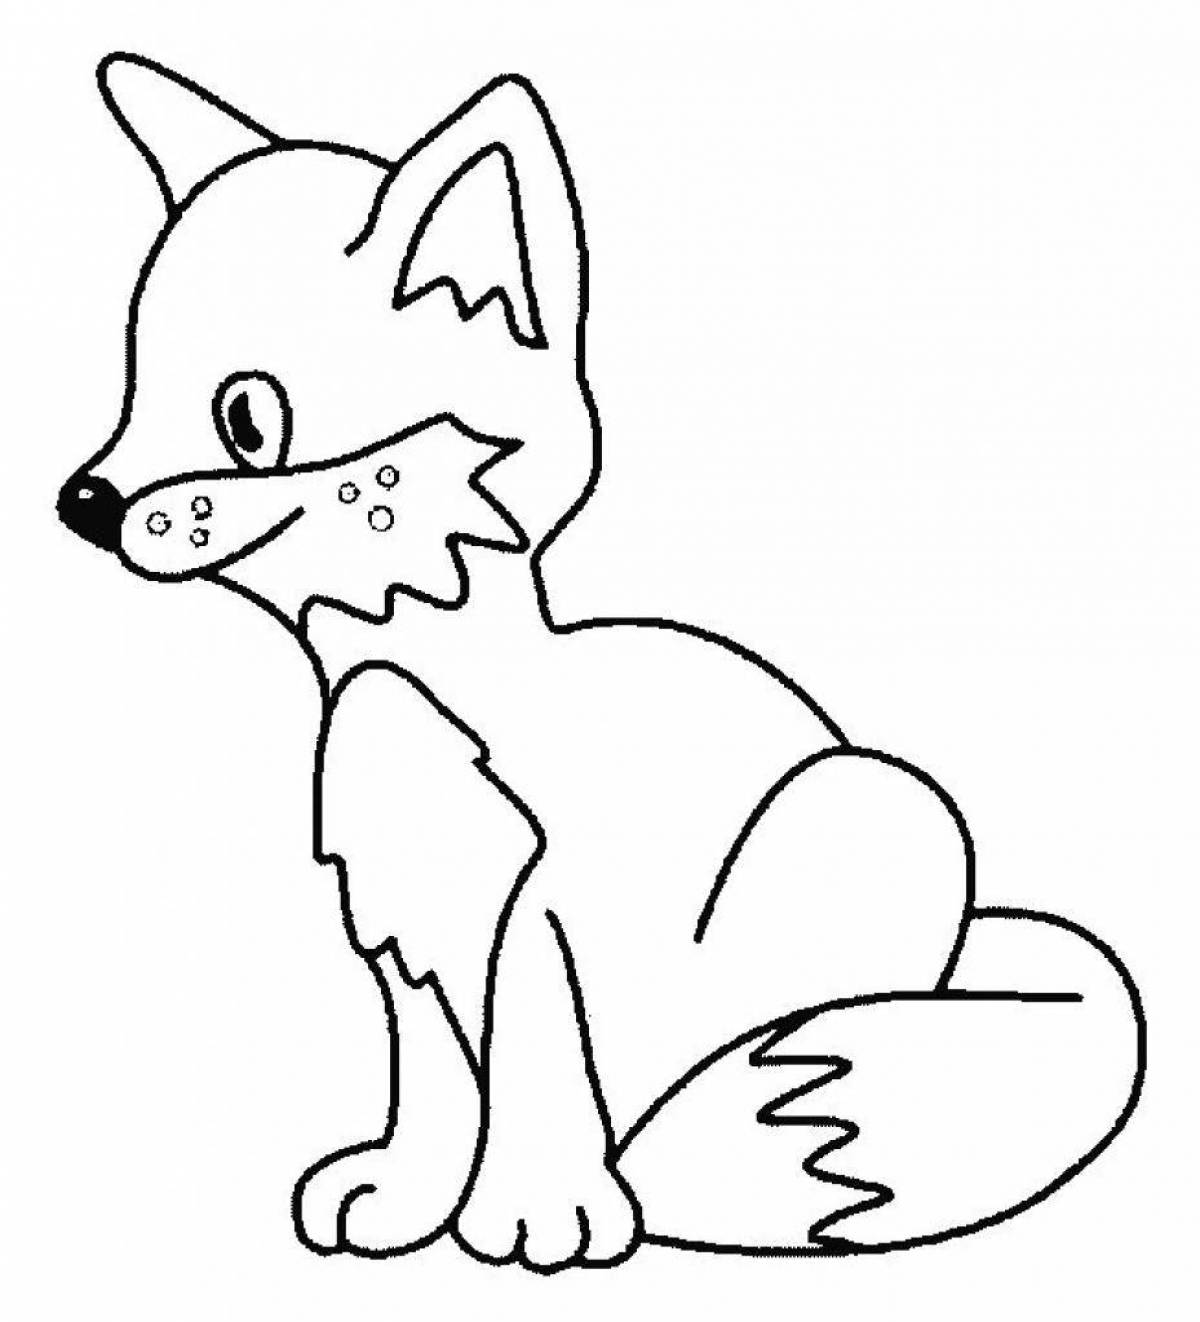 Colourful fox coloring book for children 2-3 years old